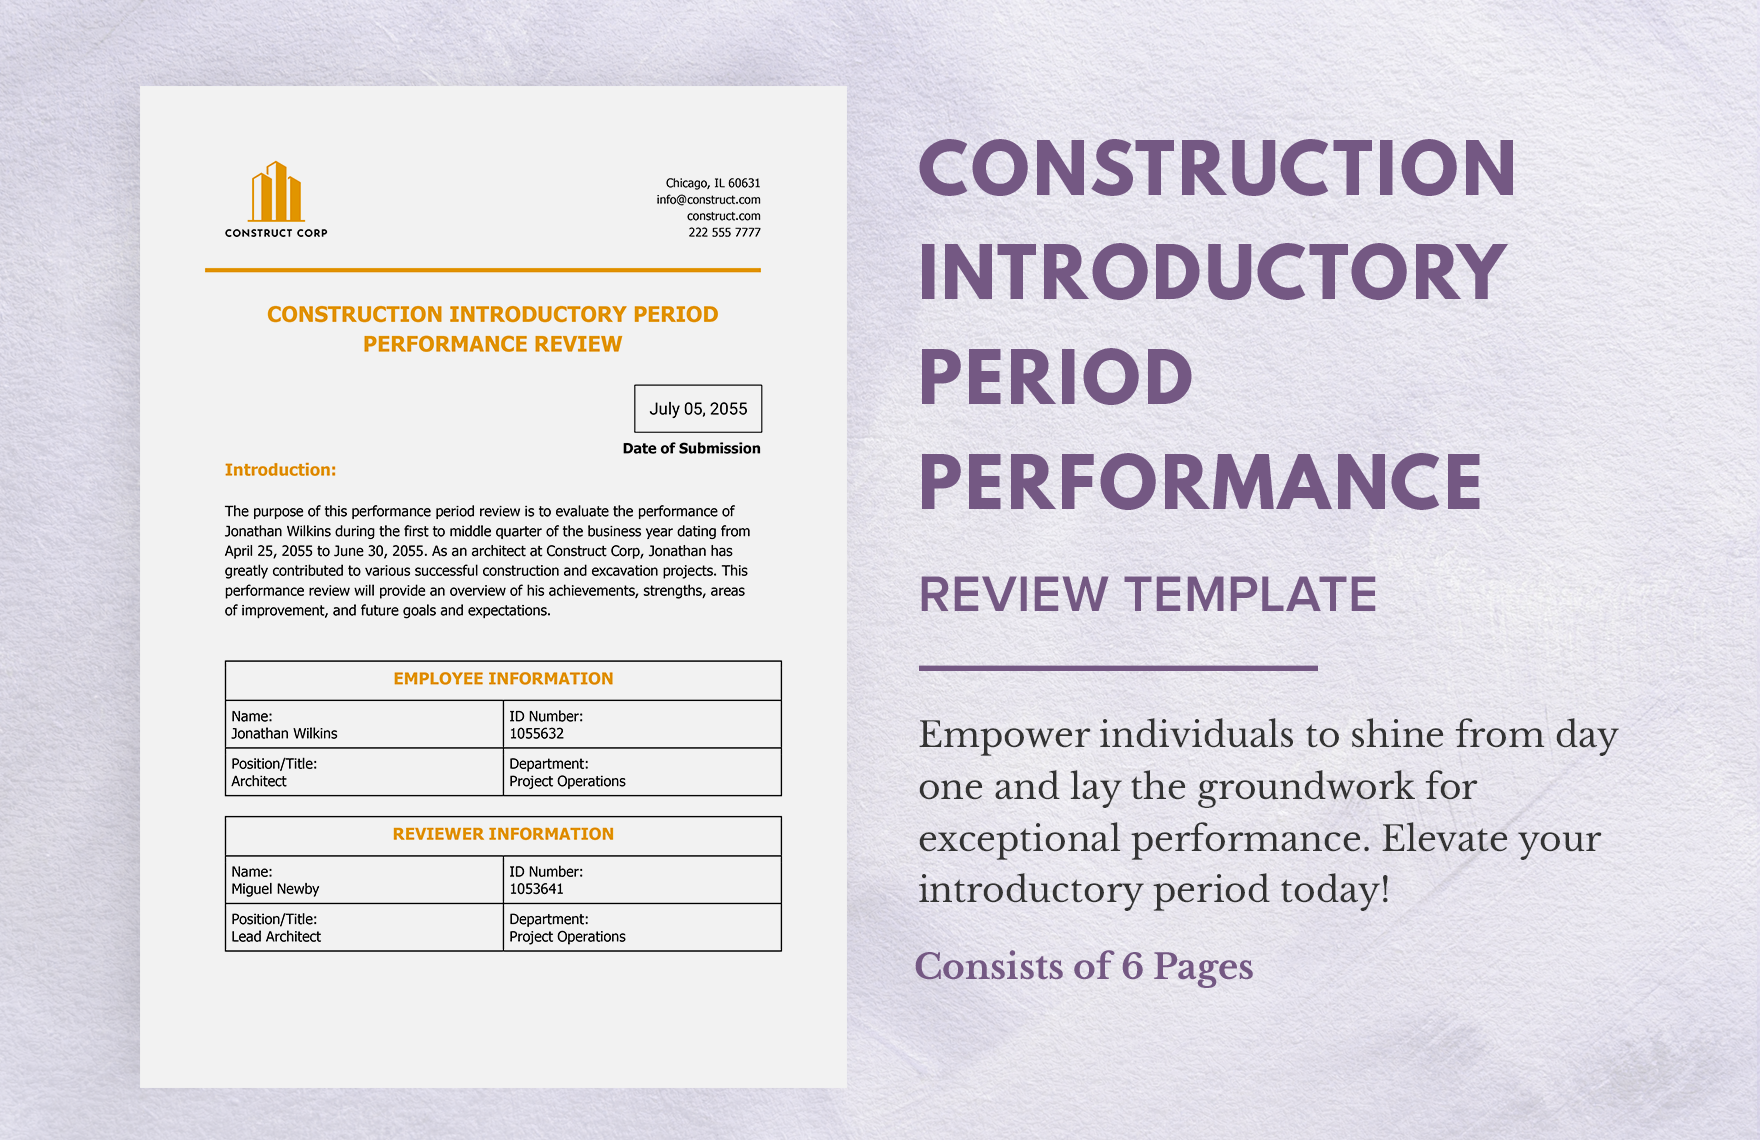 Construction Introductory Period Performance Review Template